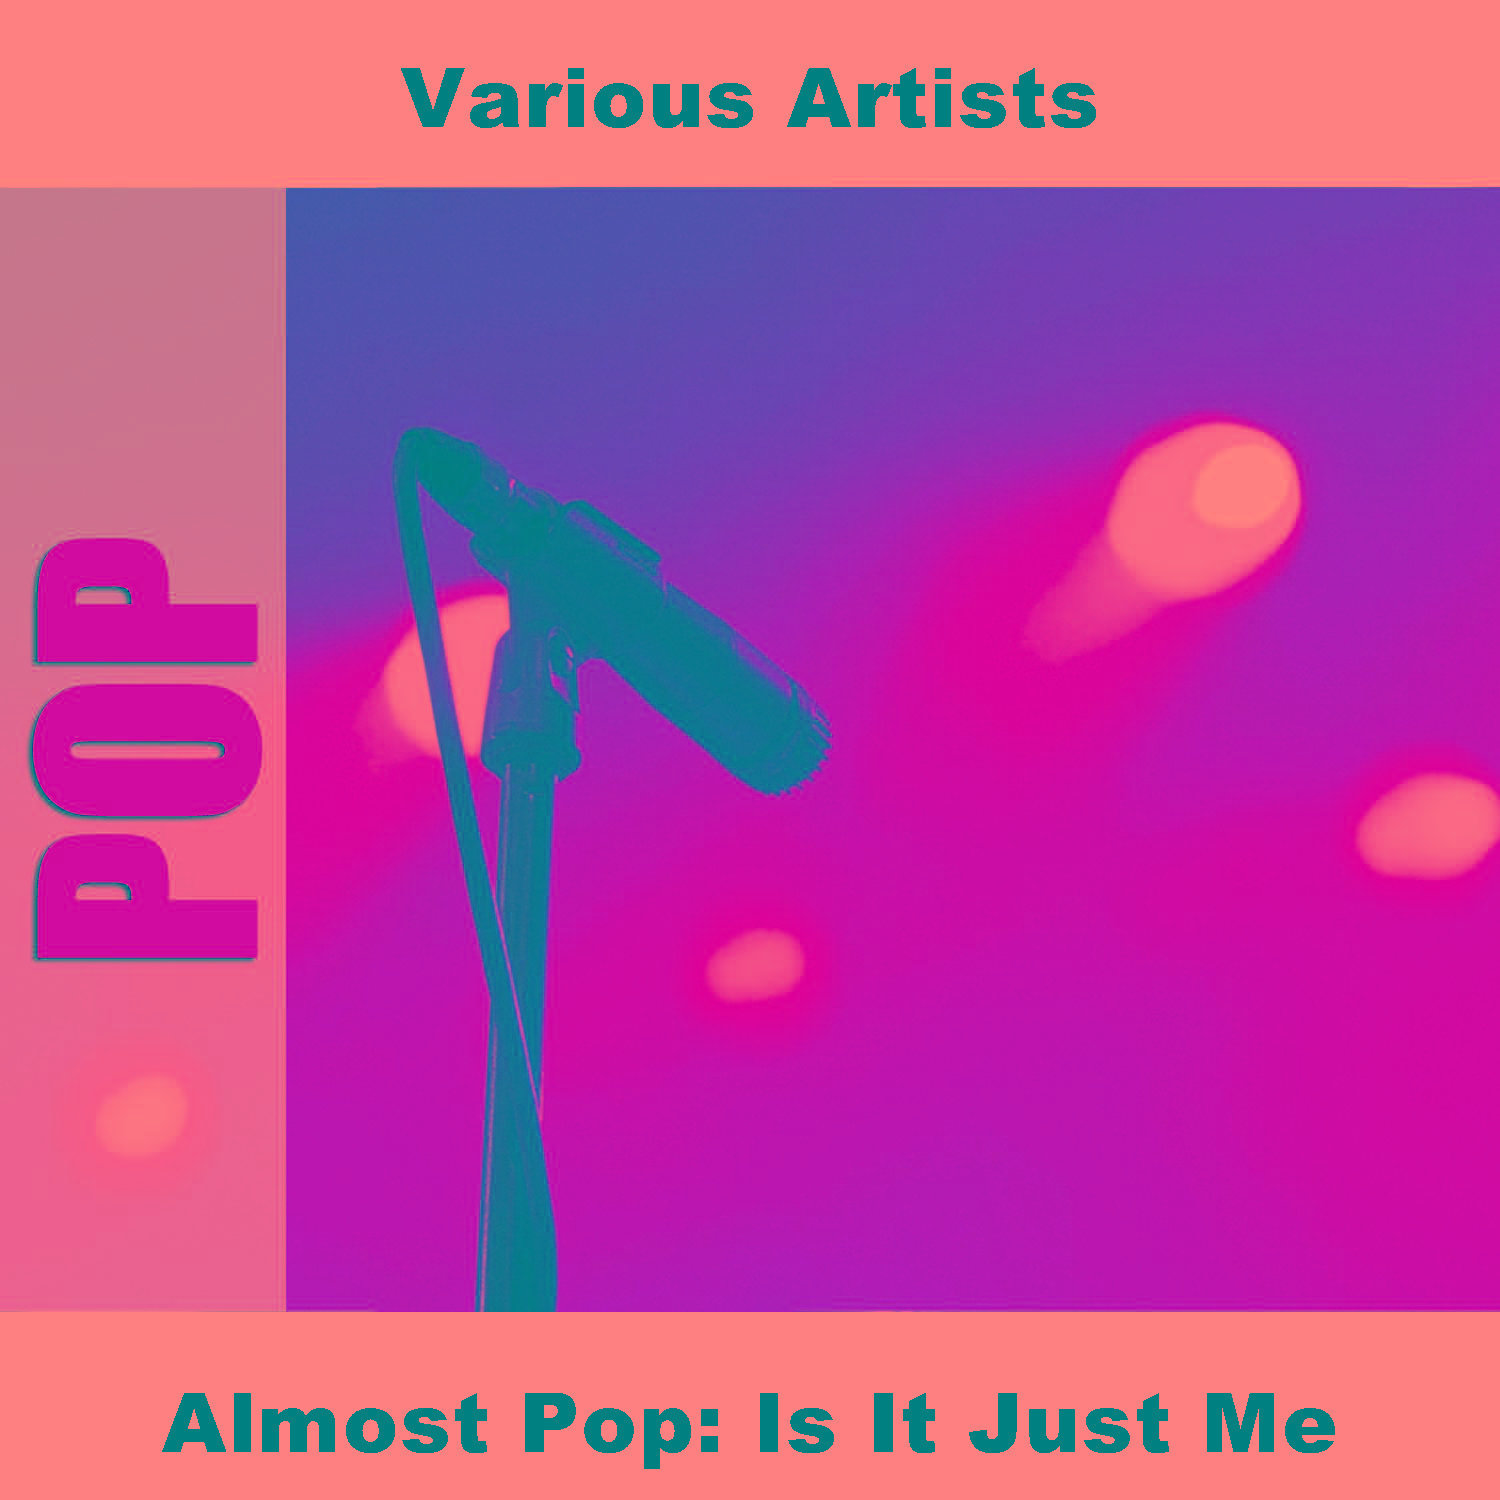 Almost Pop: Is It Just Me